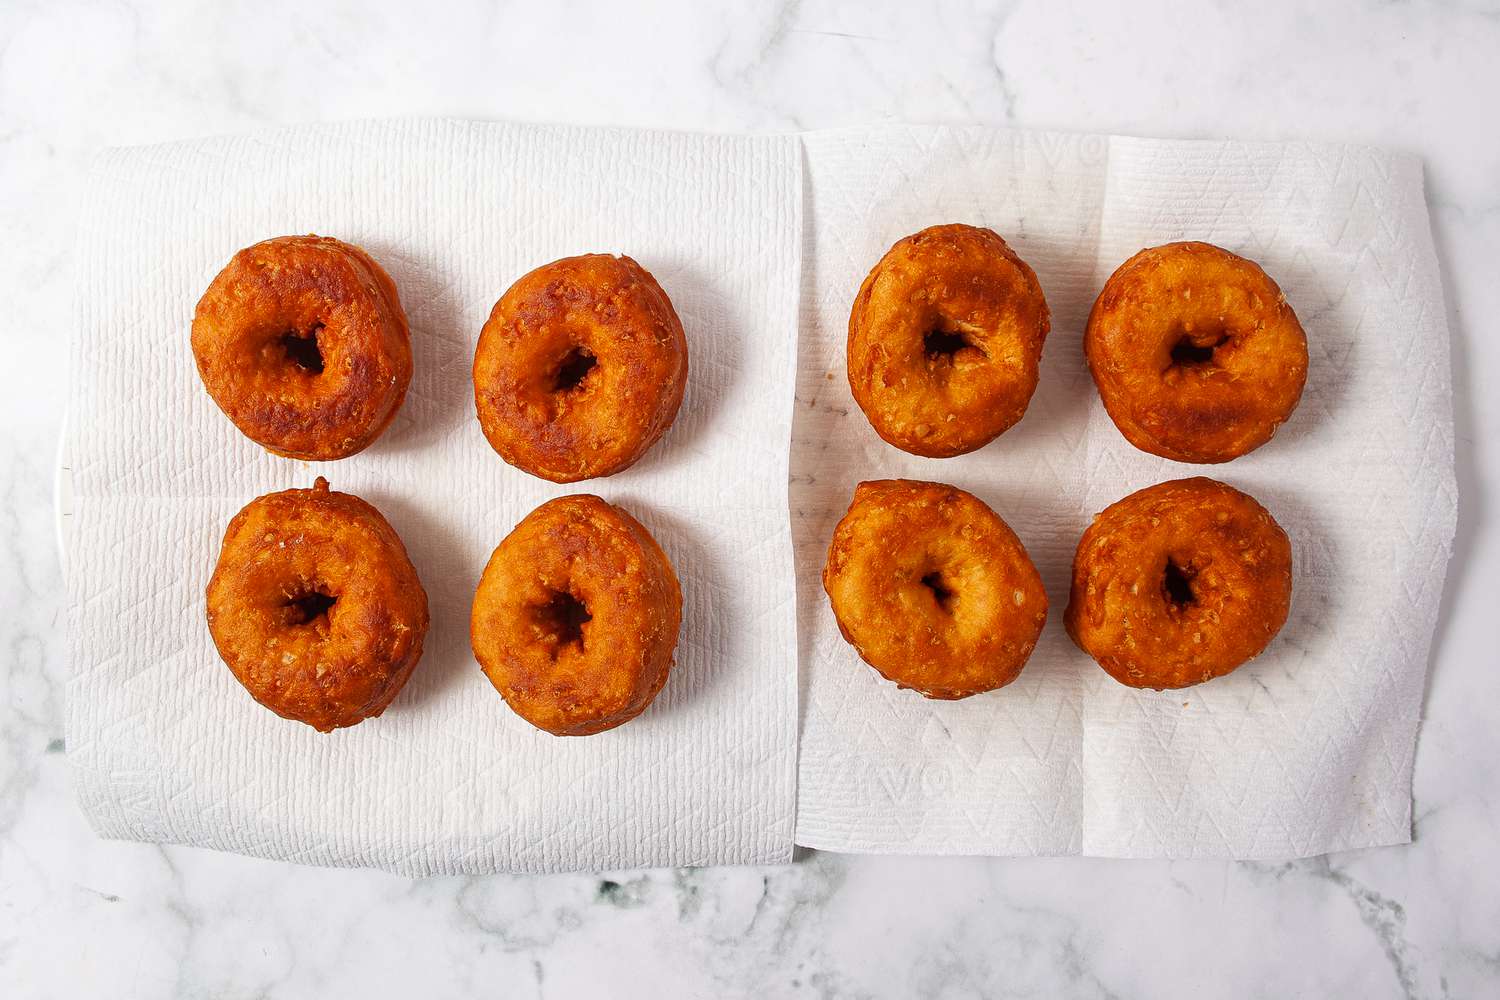 Fried doughnuts on paper towels